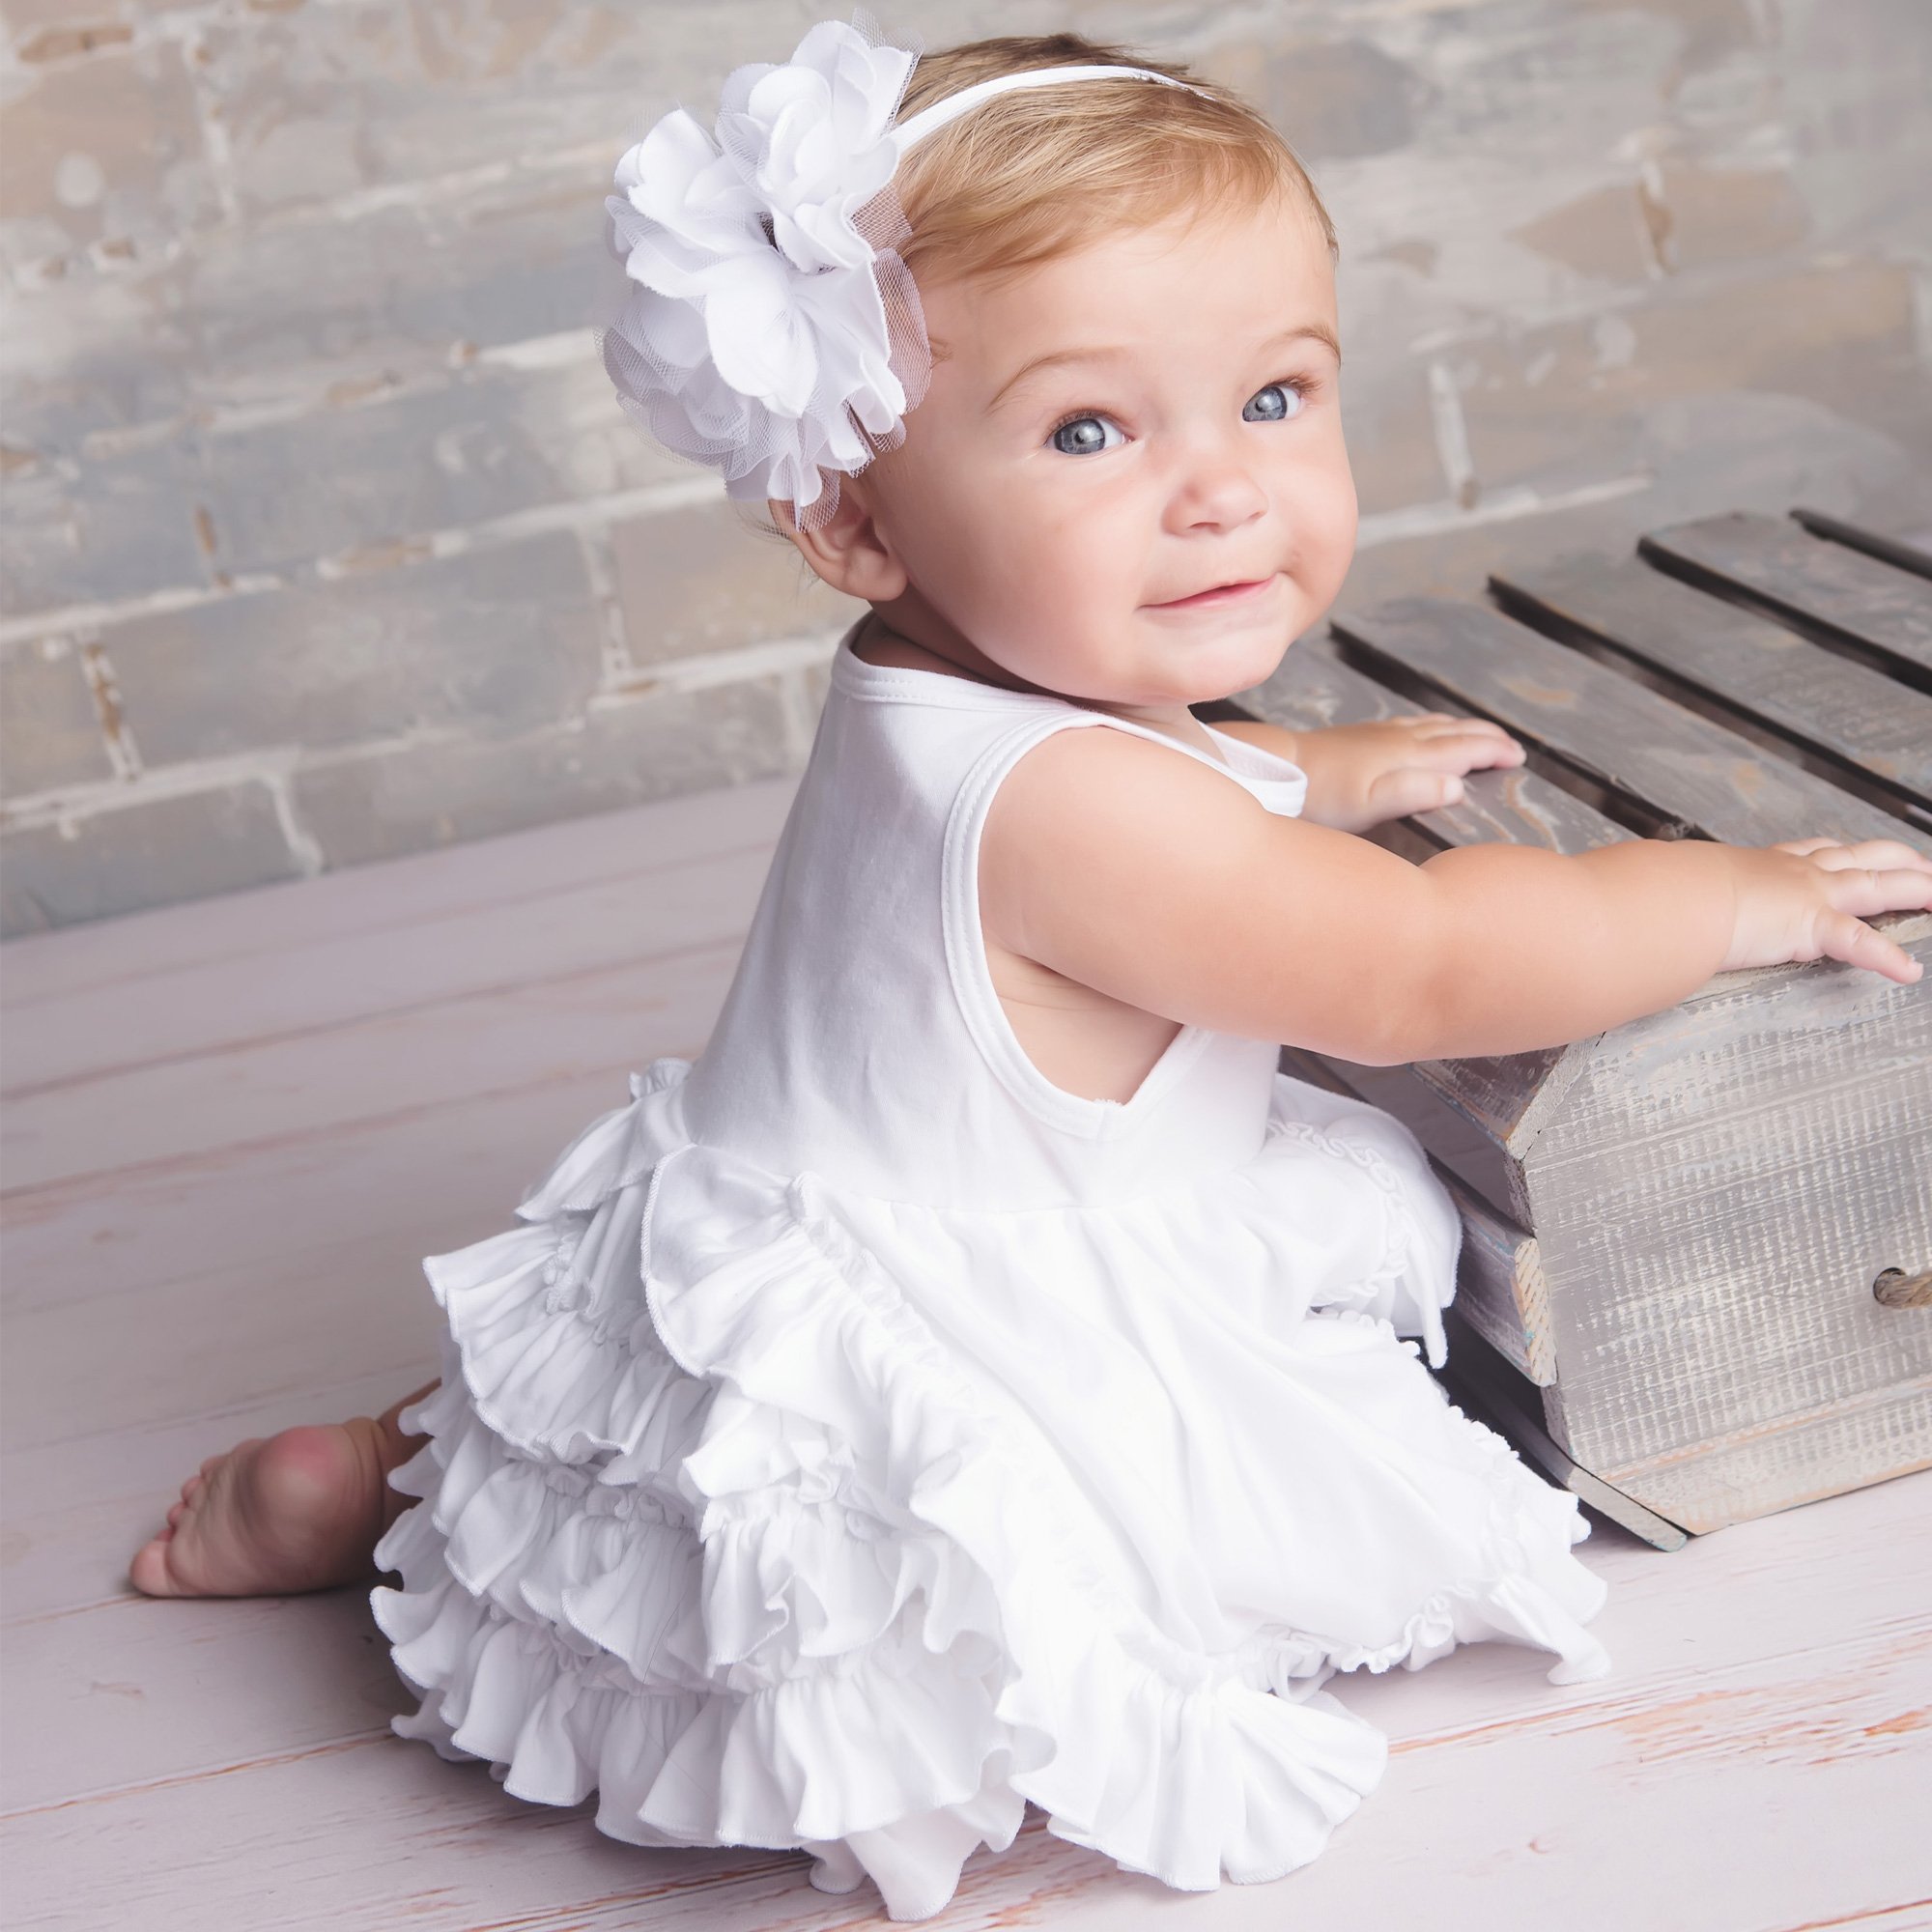 Uncovering Baby Clothes Sizes & When Sizes are Too SmallBaby Bling Street